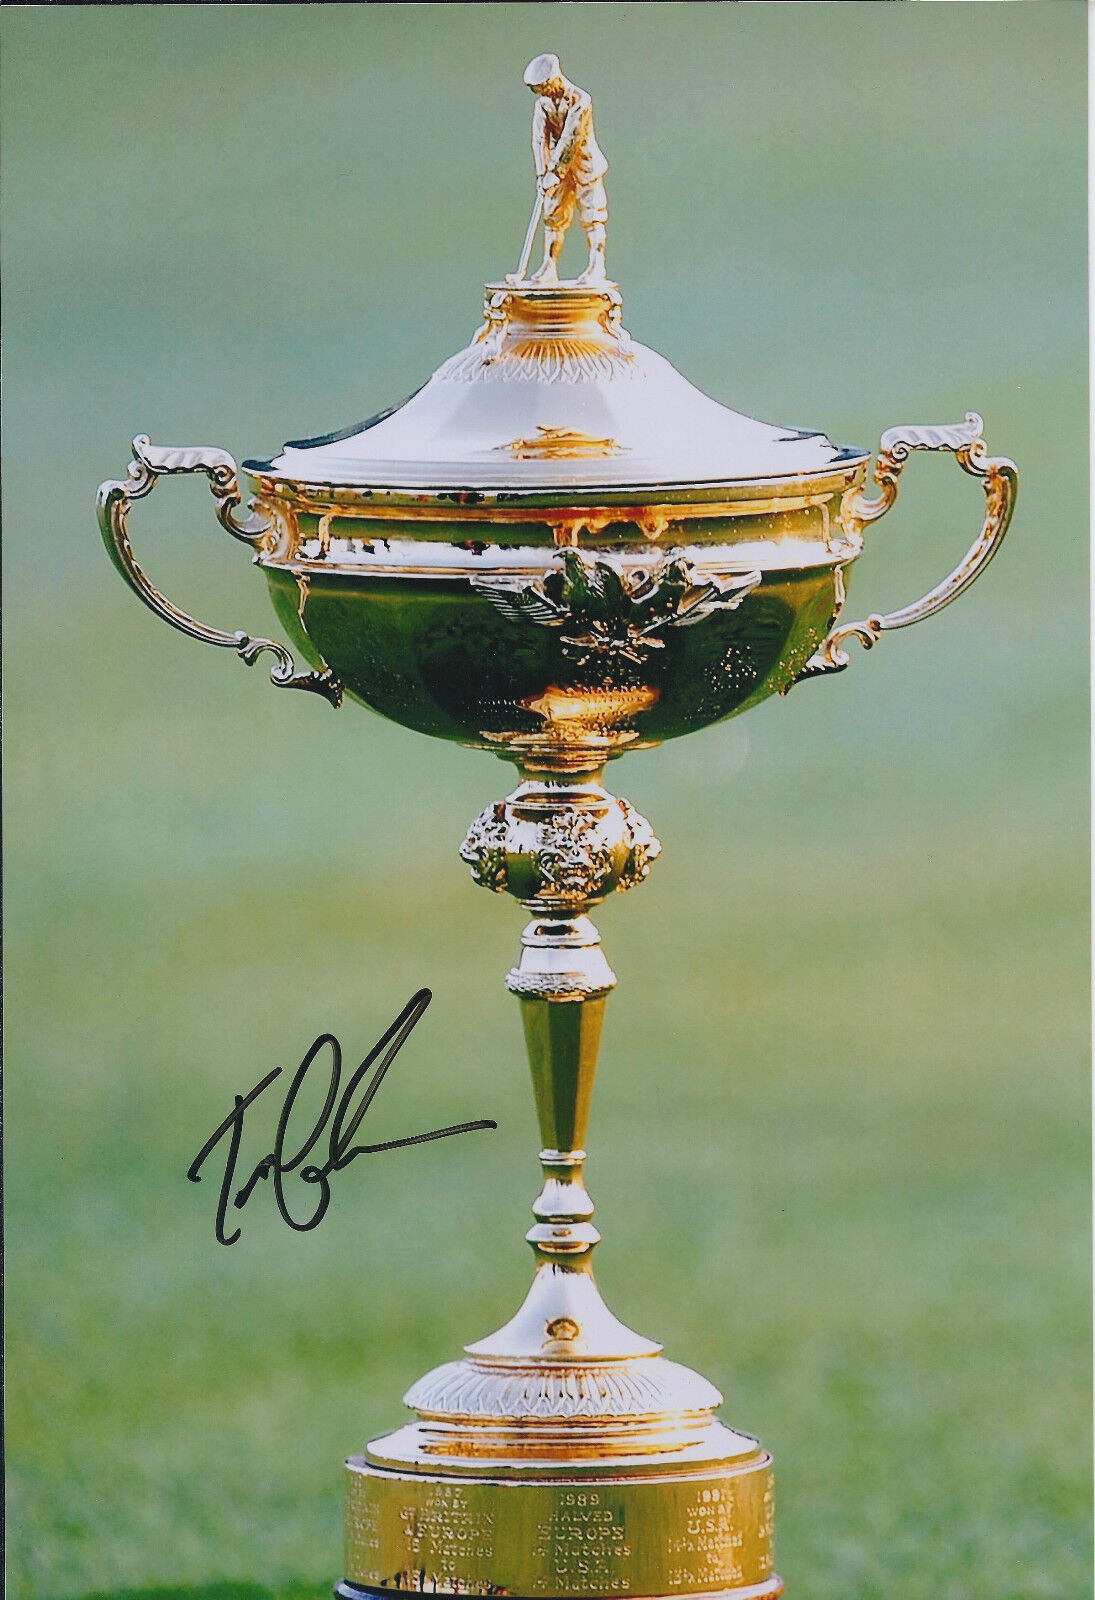 Tom LEHMAN SIGNED Autograph 12x8 Ryder Cup Photo Poster painting AFTAL GOLF PGA Tour